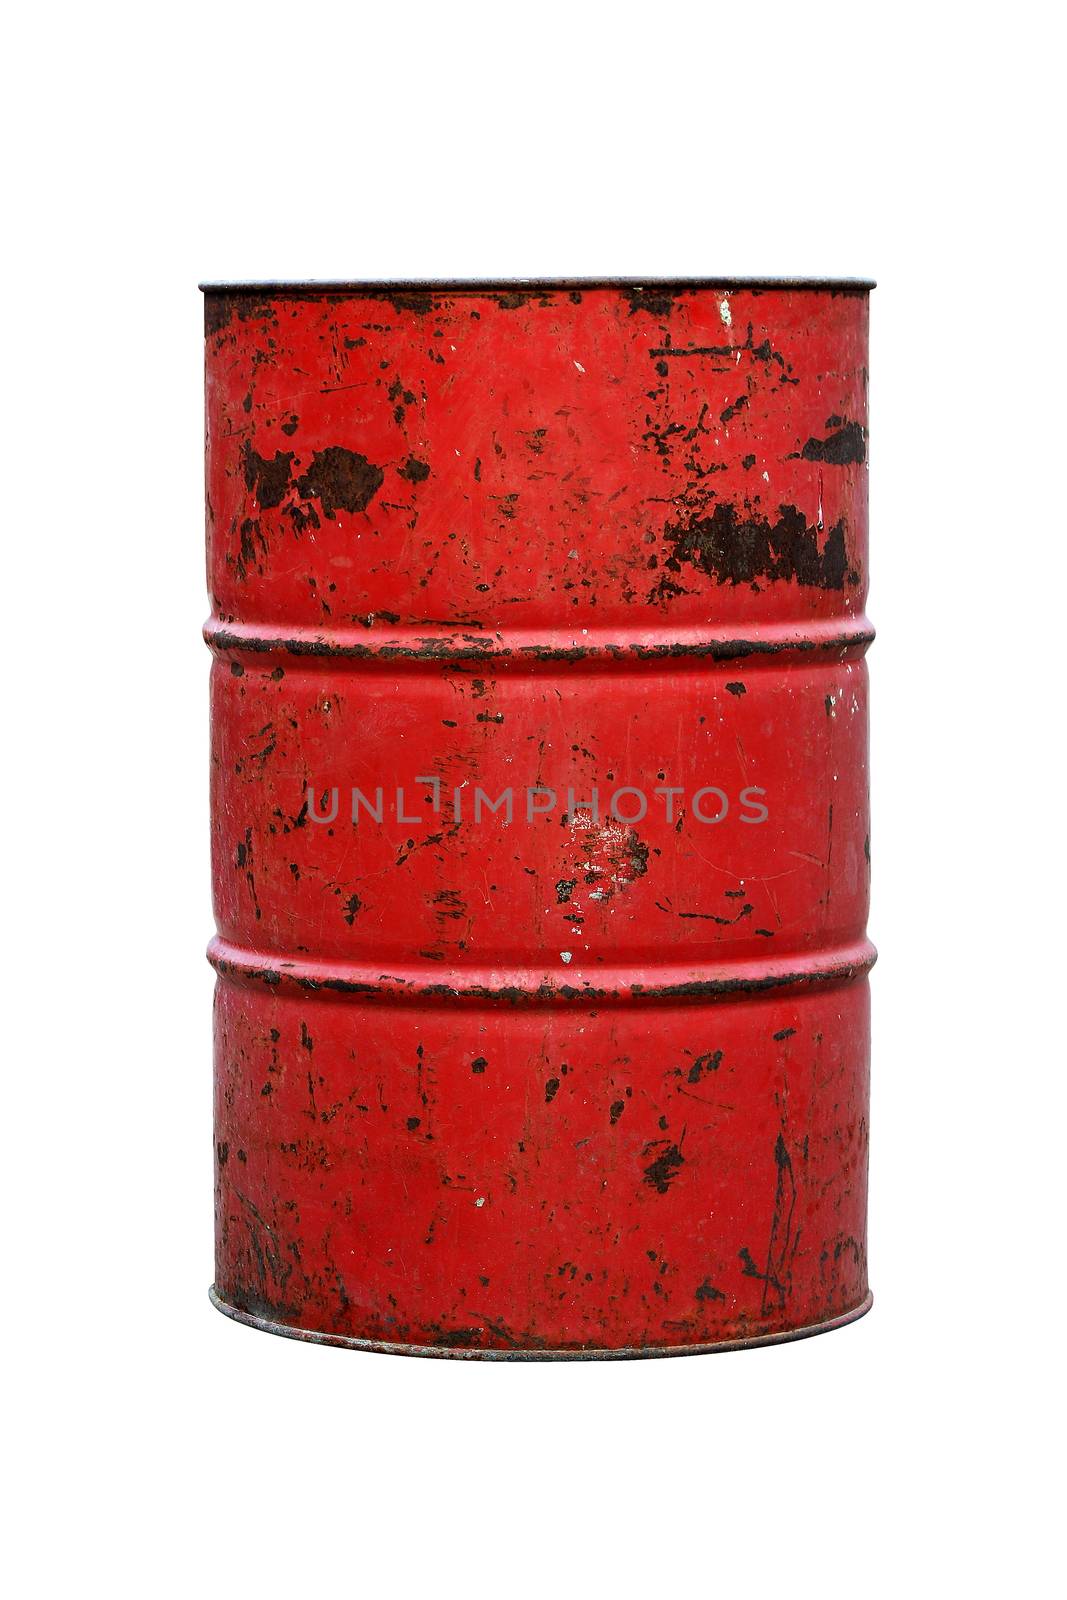 Barrel Oil red Old isolated on background white